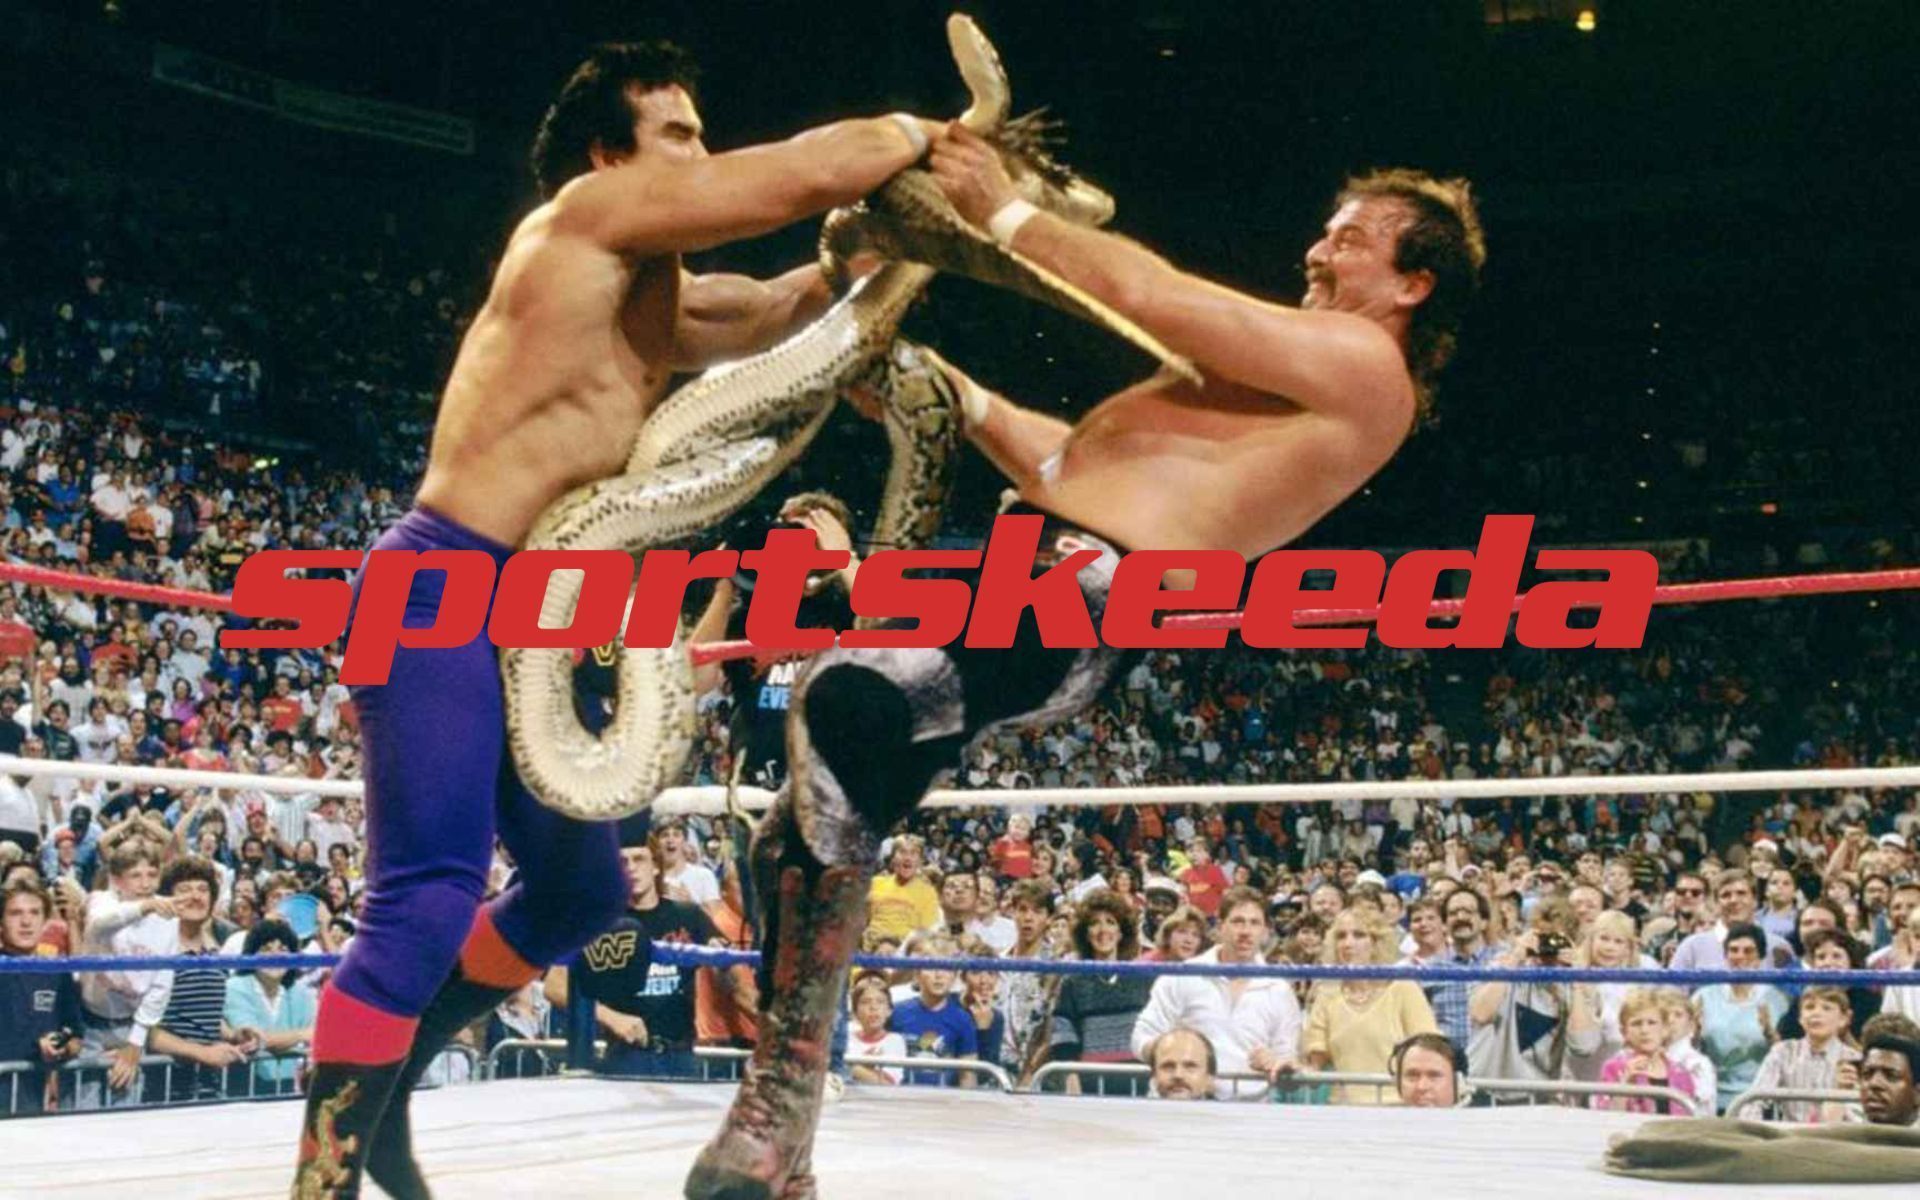 Jake Roberts and Ricky Steamboat had some epic matches!